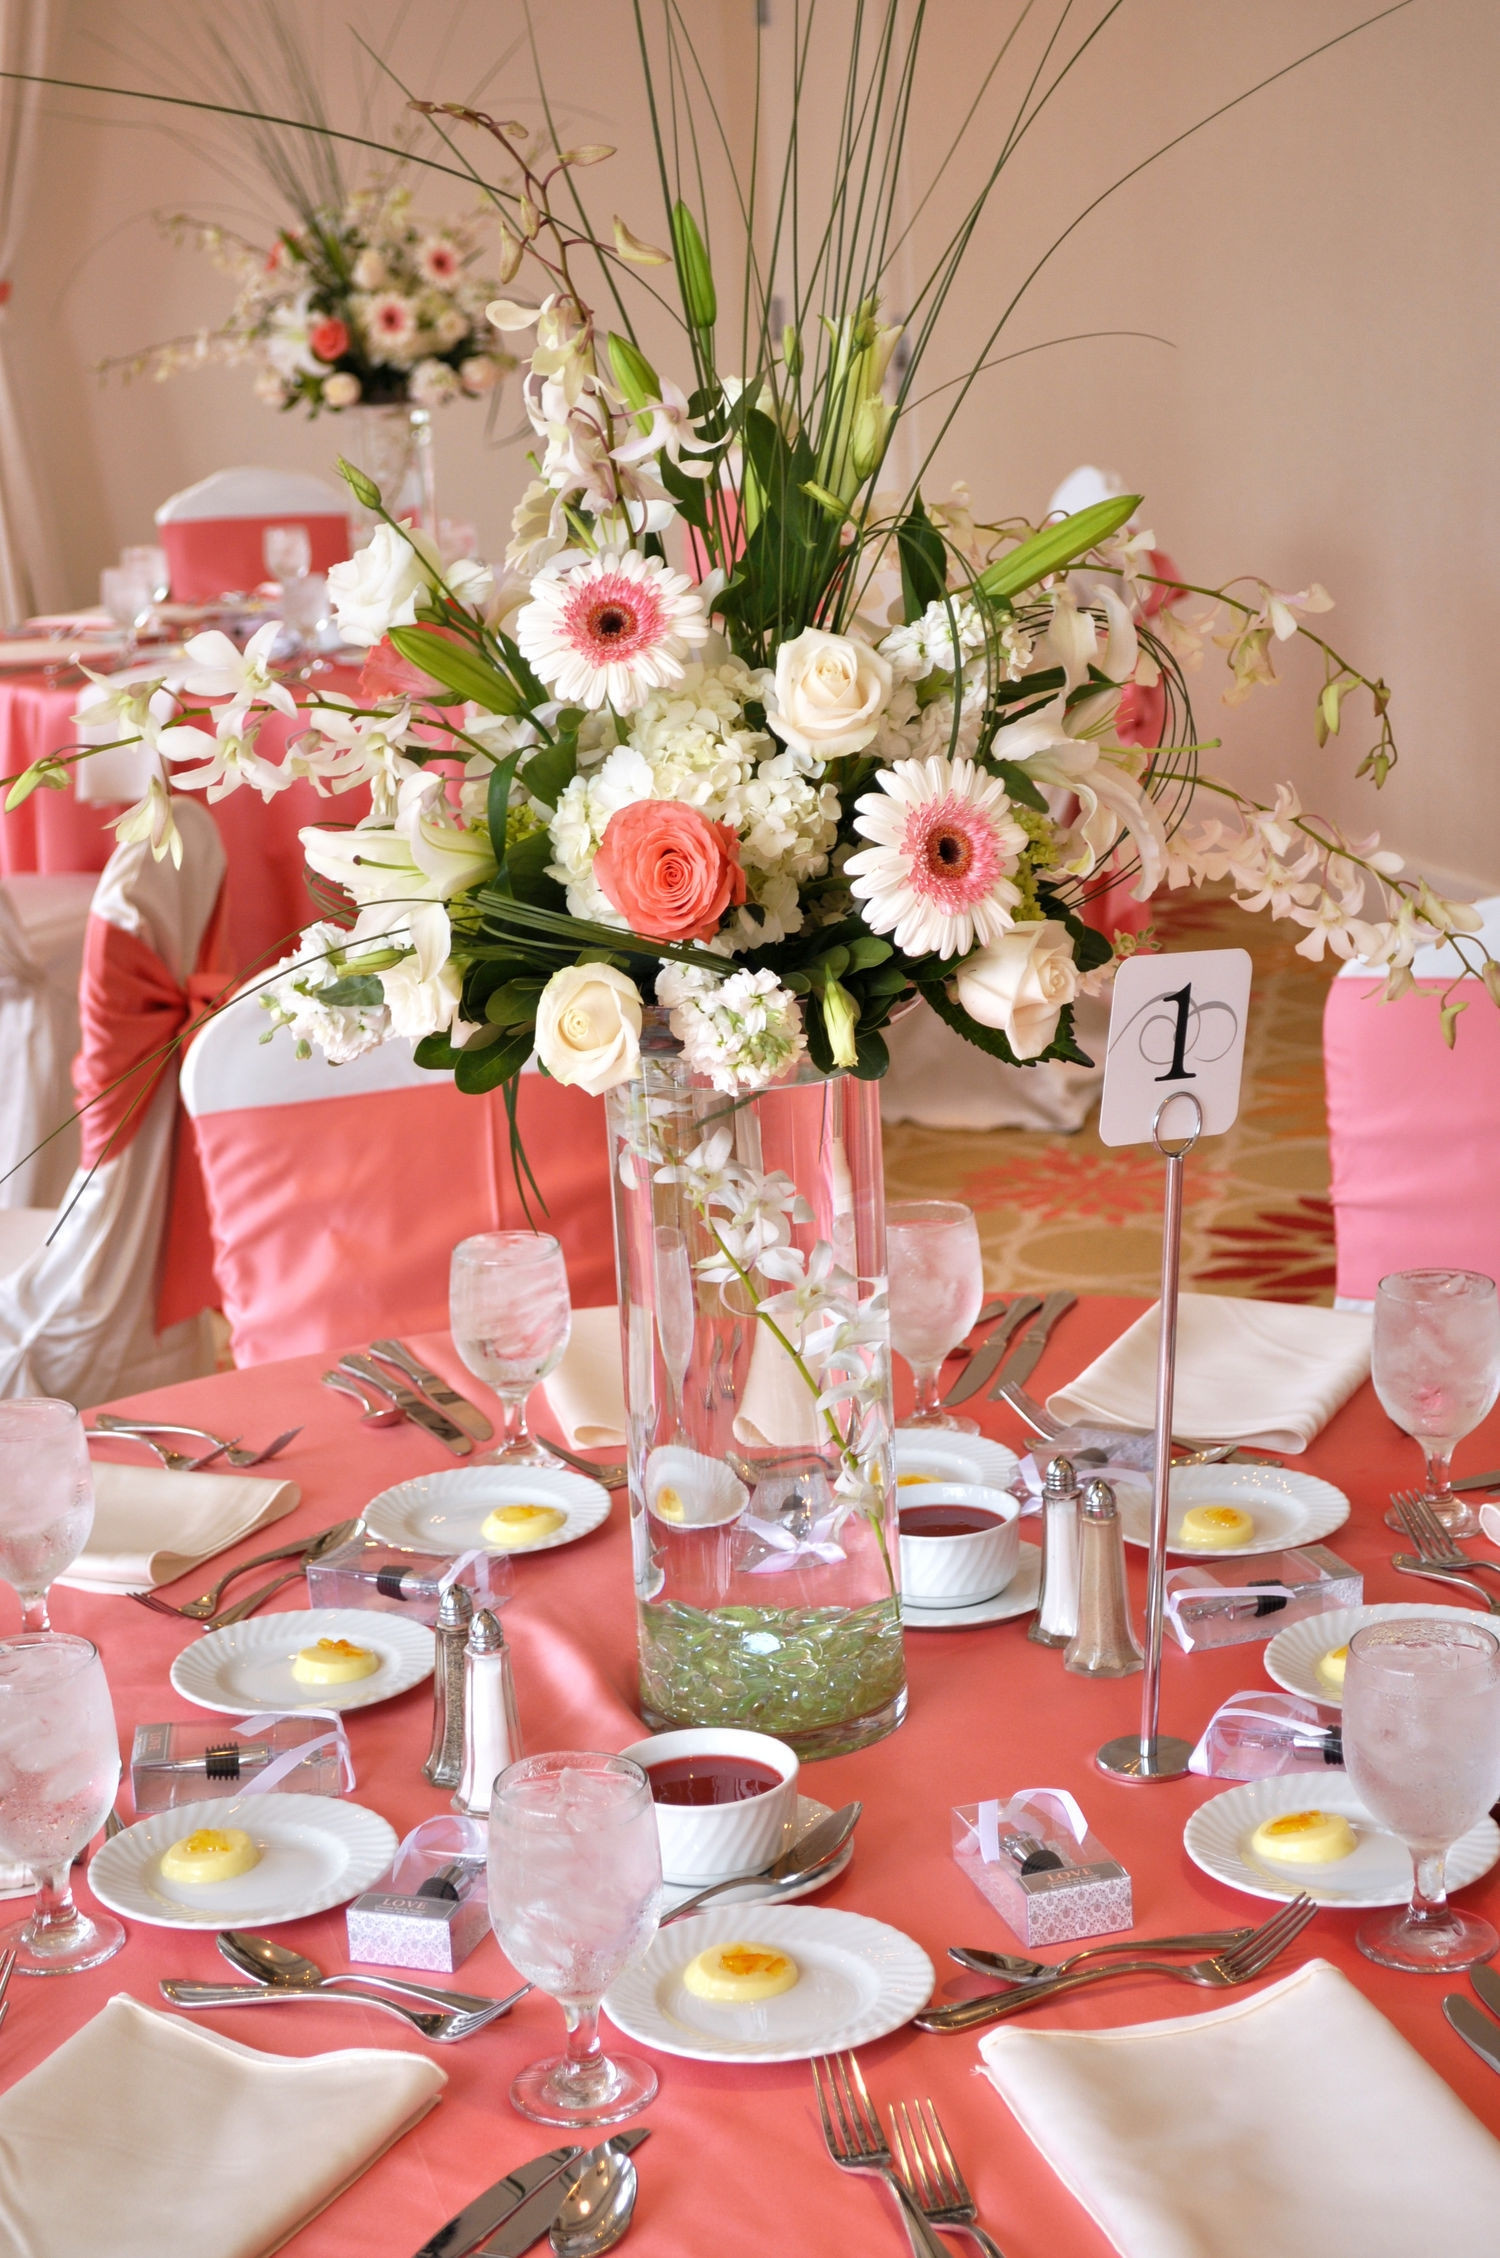 Coral Wedding Decor
 How To Choose The Right Wedding Centerpieces For Round